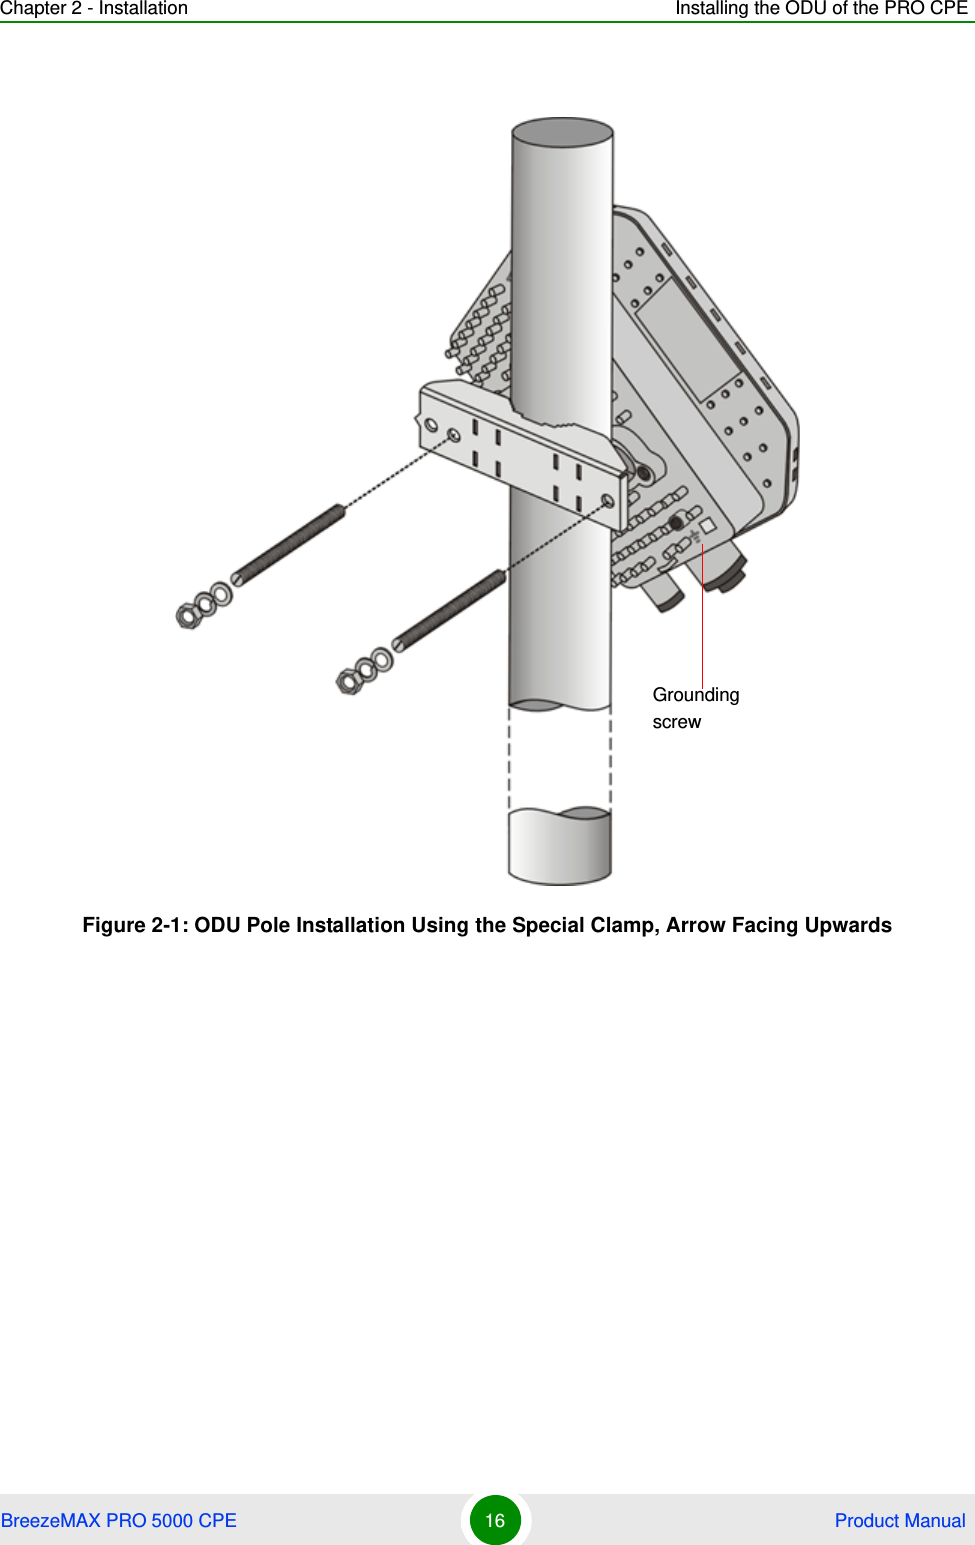 Chapter 2 - Installation Installing the ODU of the PRO CPEBreezeMAX PRO 5000 CPE 16  Product ManualFigure 2-1: ODU Pole Installation Using the Special Clamp, Arrow Facing UpwardsGrounding screw